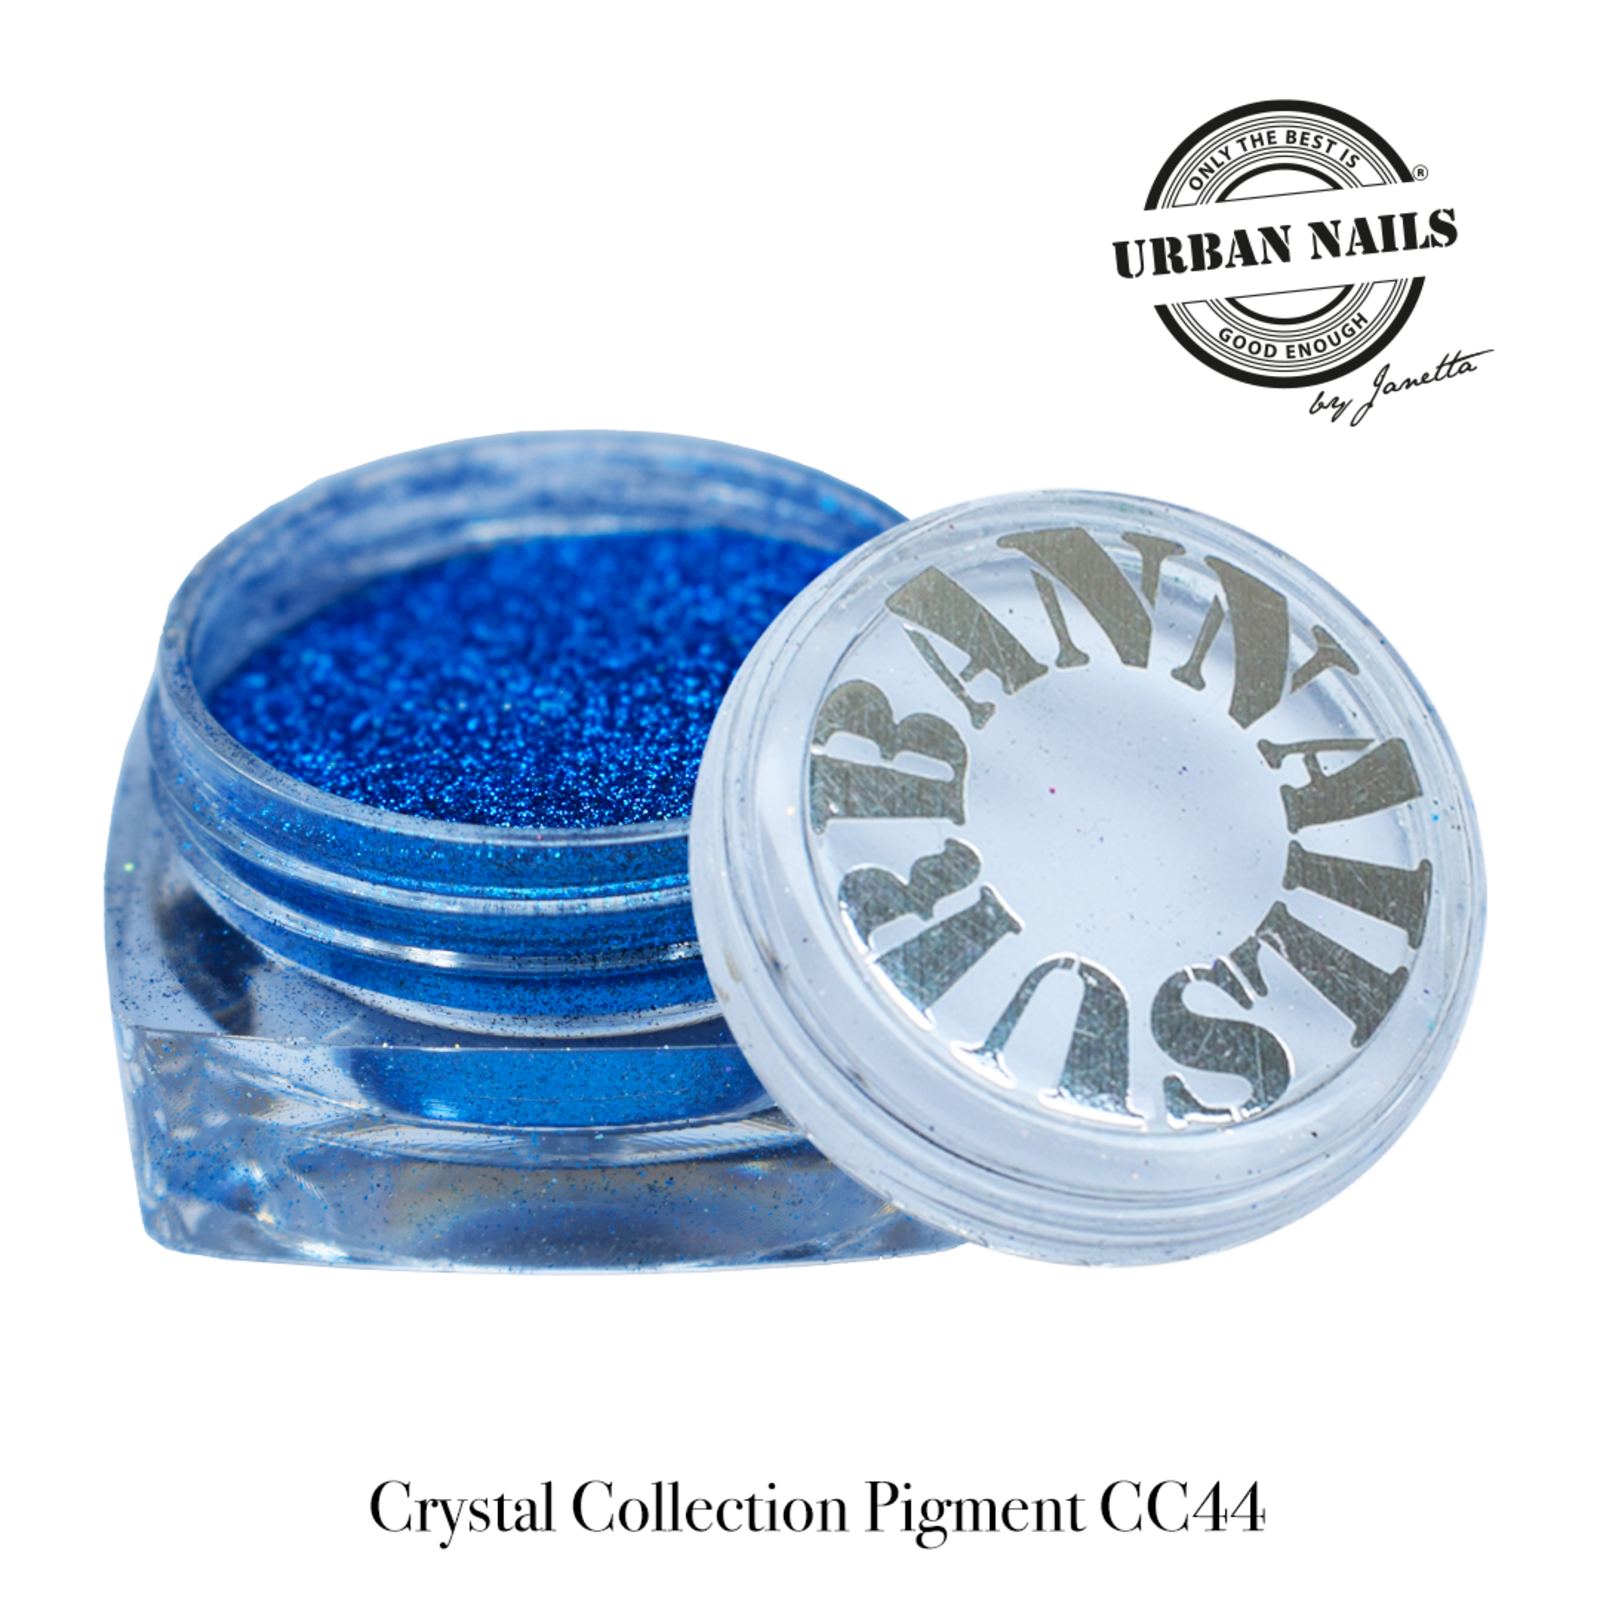 Urban nails Crystal Collection CC44